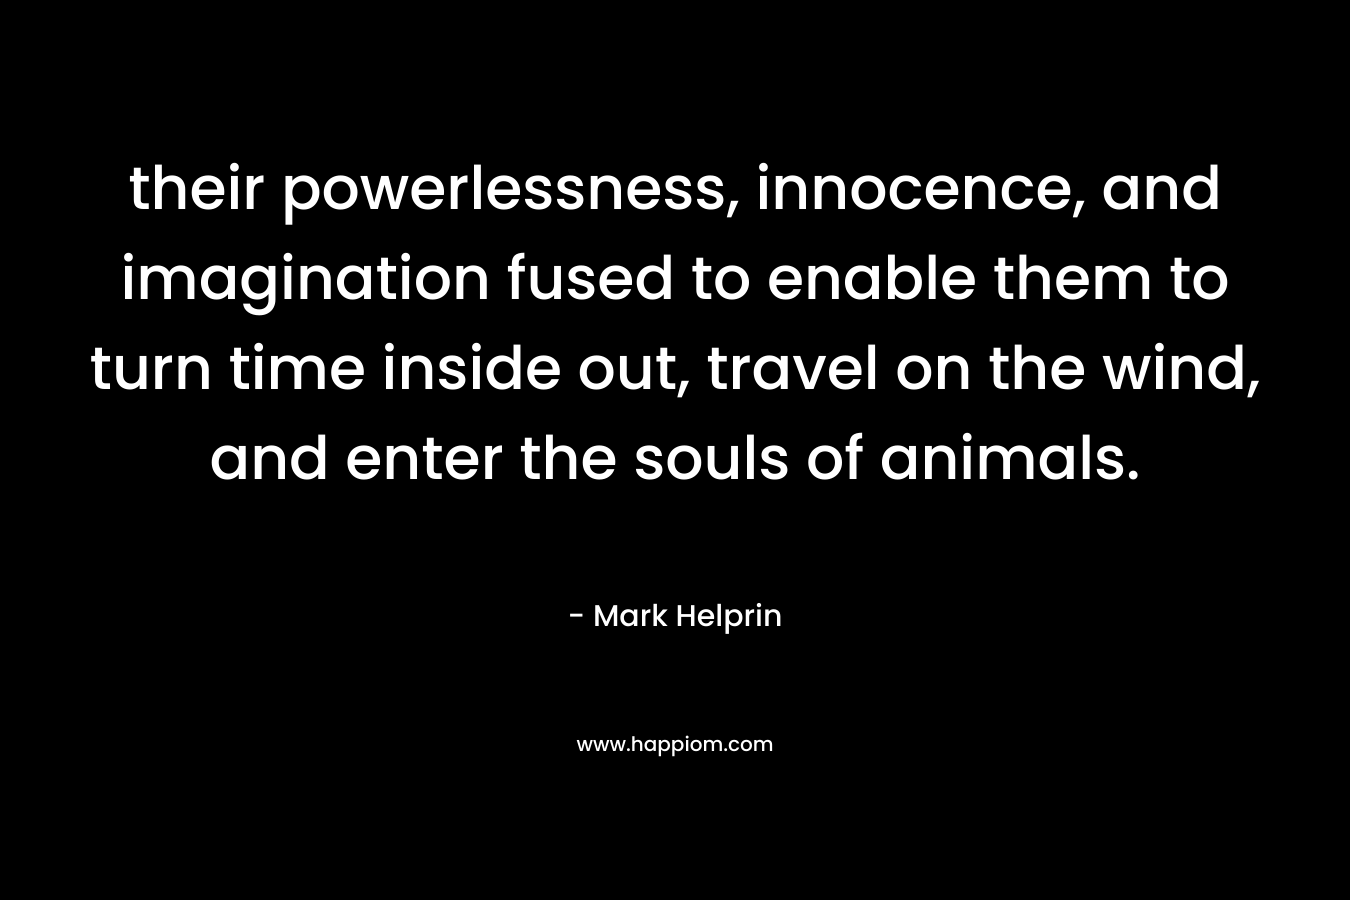 their powerlessness, innocence, and imagination fused to enable them to turn time inside out, travel on the wind, and enter the souls of animals. – Mark Helprin